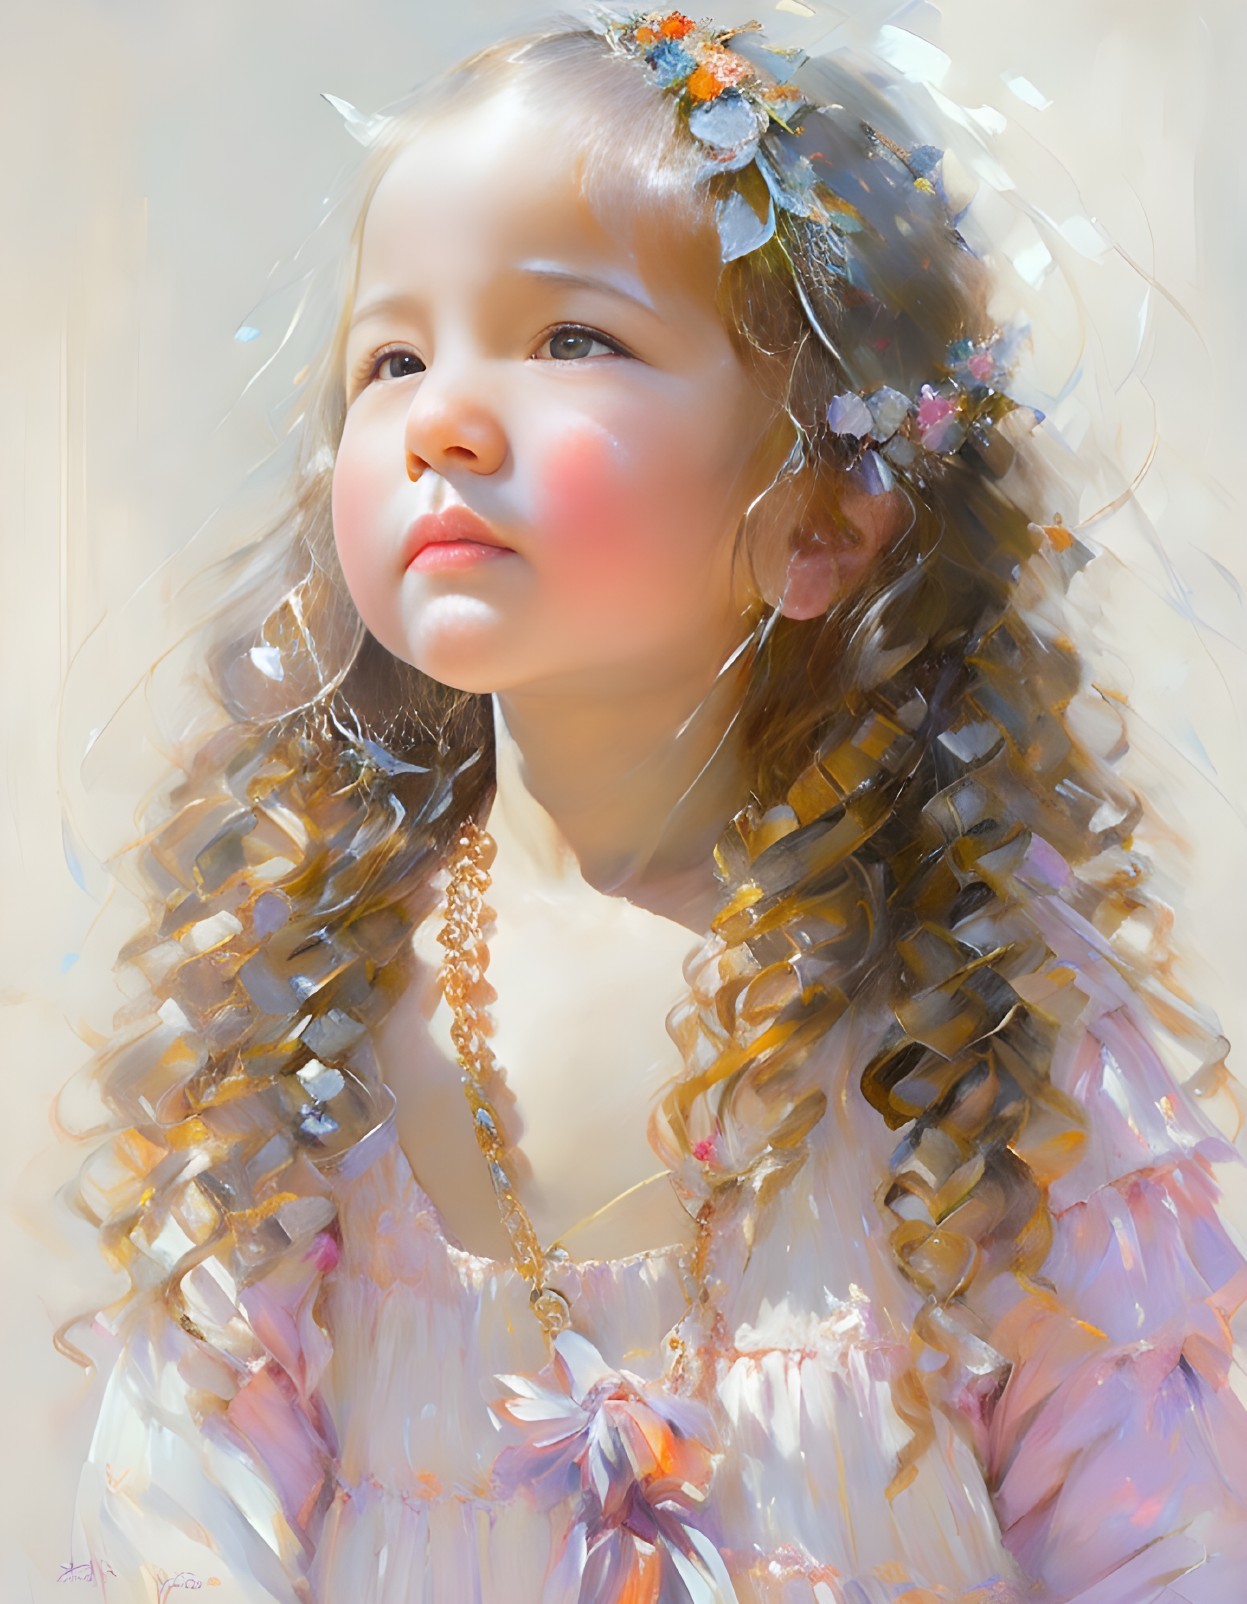 Curly Haired Girl with Flower Adornments and Pearl Necklace